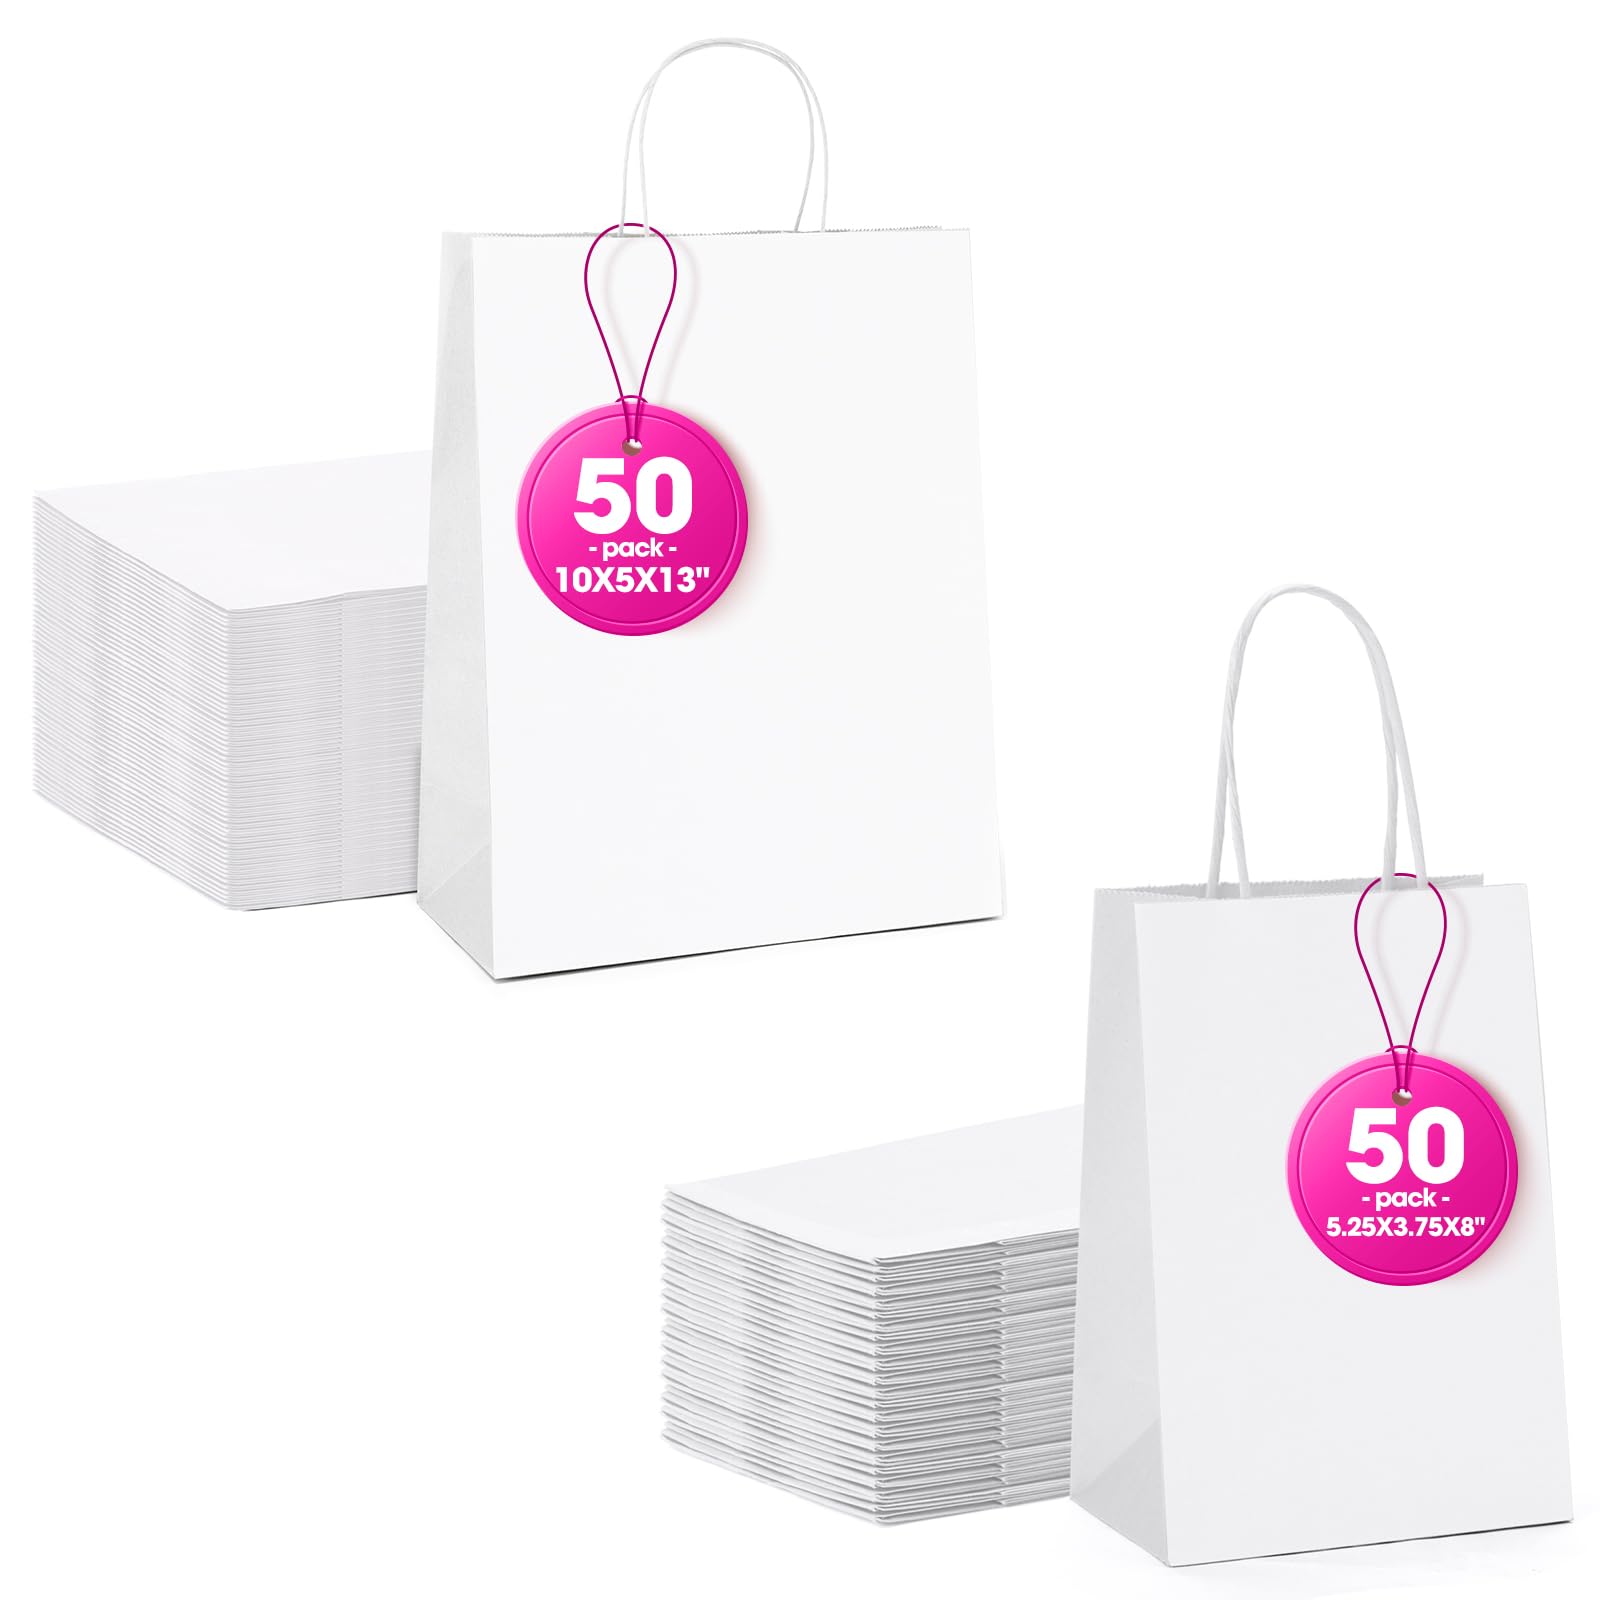 MESHA White Gift Bags 5.25x3.75x8 Inches 50Pcs & 10x5x13 Inches 50Pcs Paper Bags with Handles Small Shopping Bags,Wedding Party Favor Bags